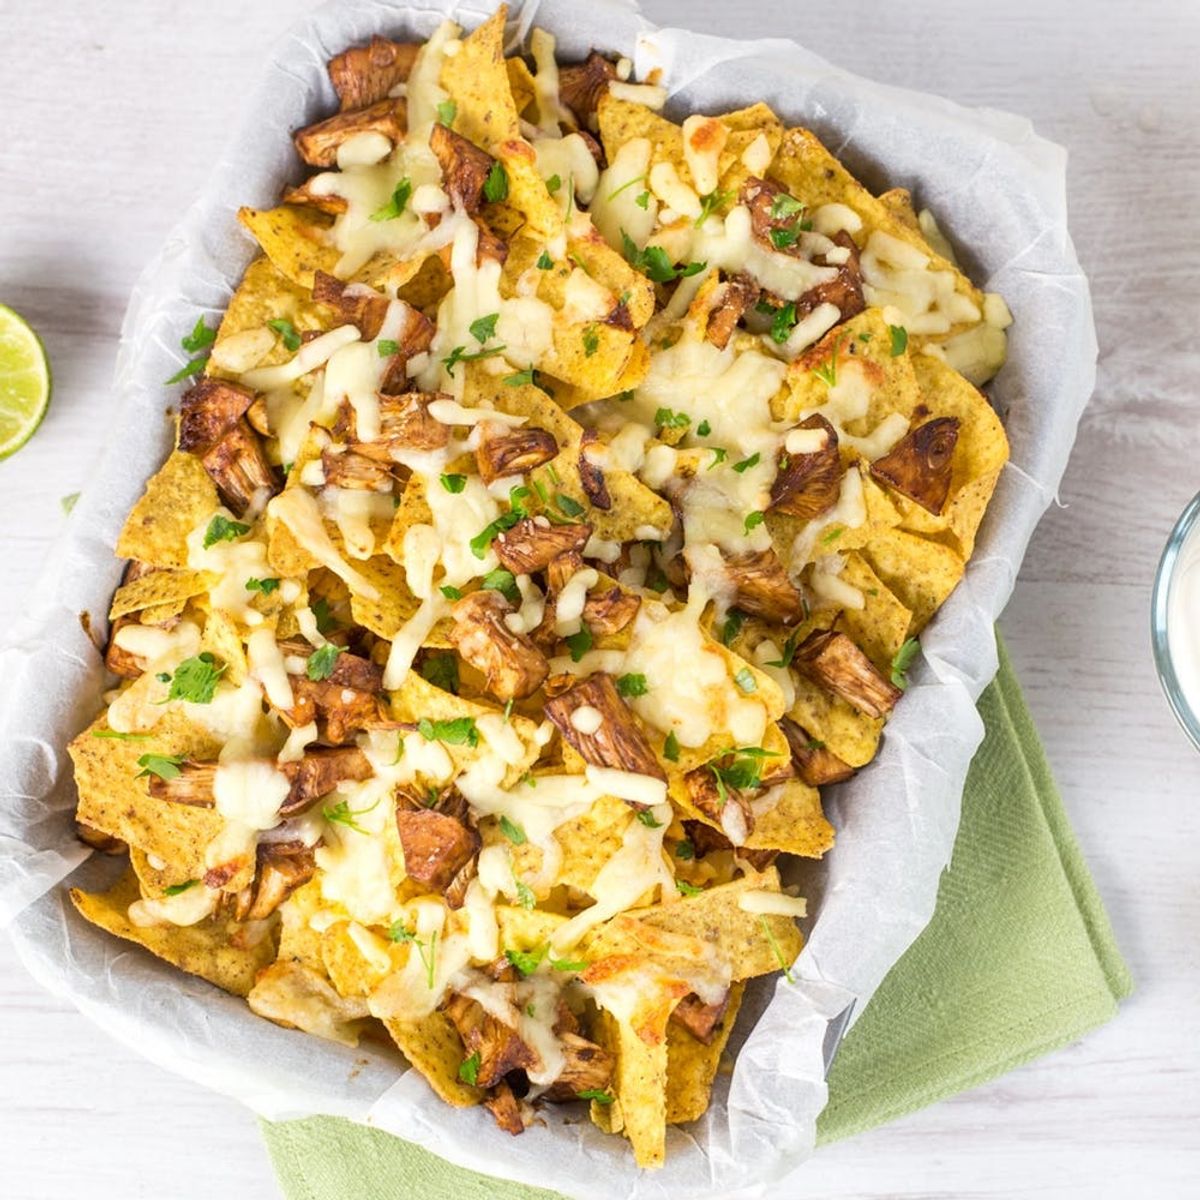 These Pulled Jackfruit Nachos Will Be the Star of Your Super Bowl Party!